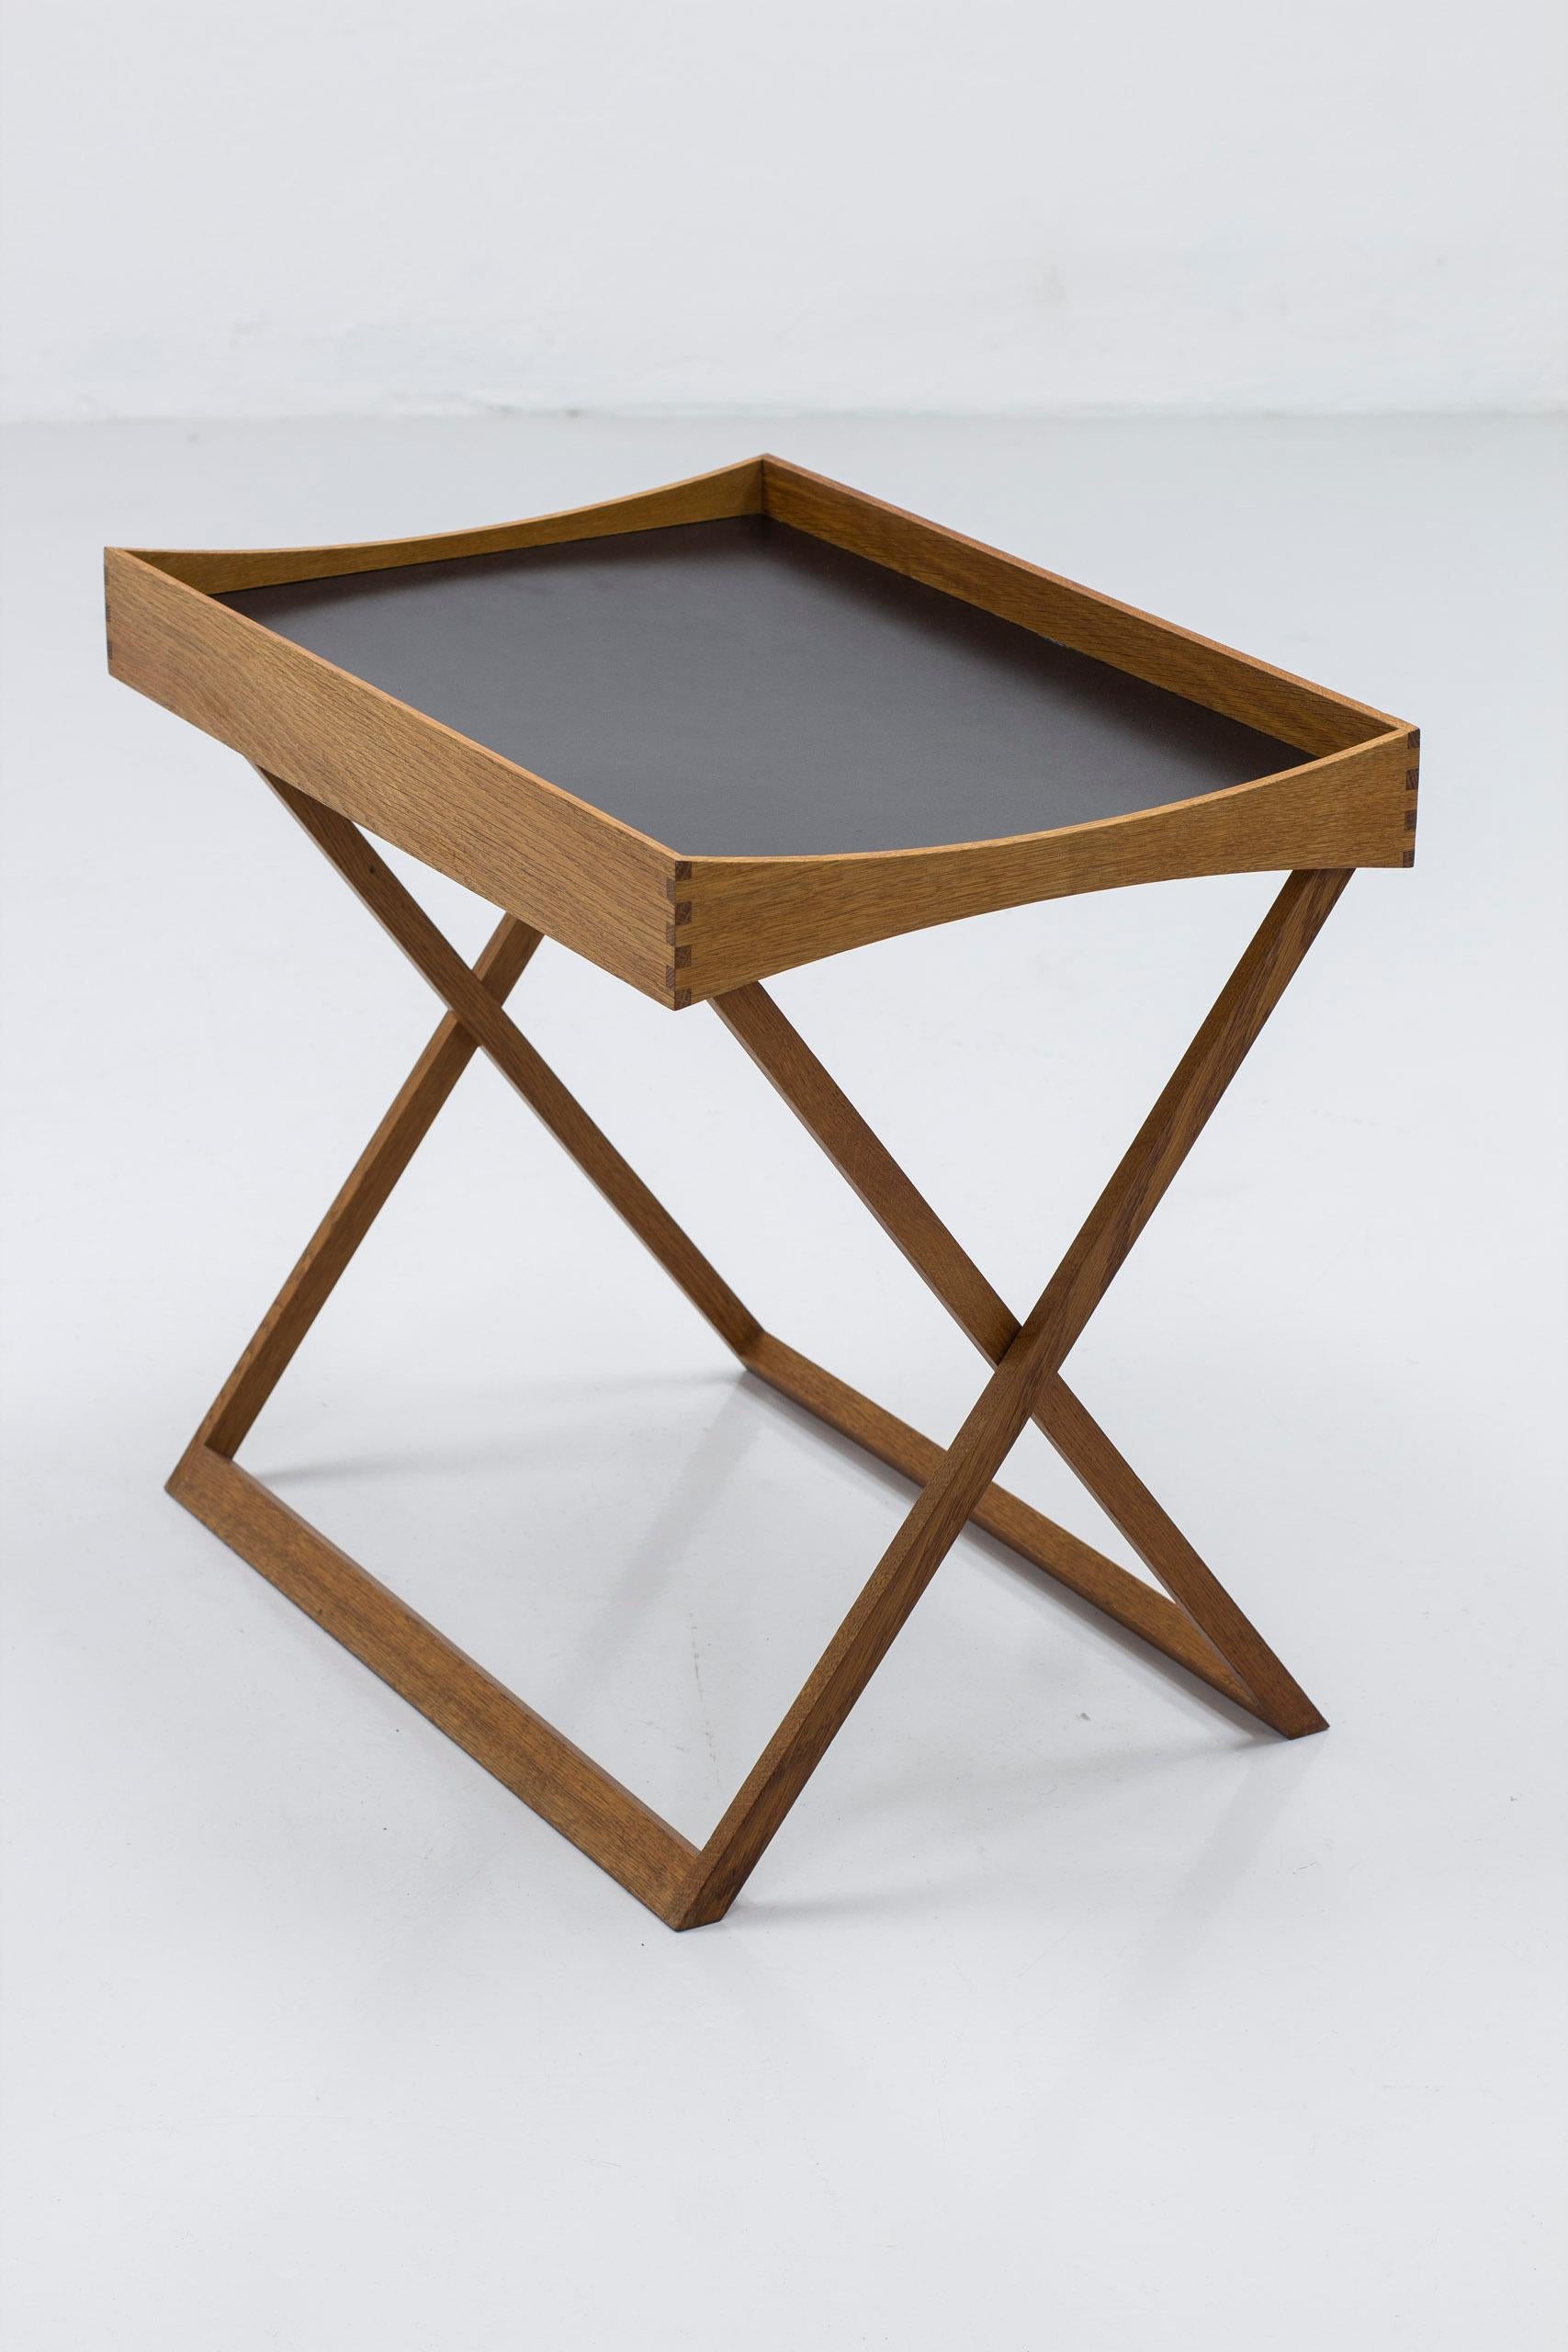 Danish modern folding tray table designed by Torsten Johansson. Produced in Denmark by Bo-Ex, ca 1963. Made from solid oiled oak with finger joinery and black formica top on one side and oak veneer on the other. Easily folds together to store away.